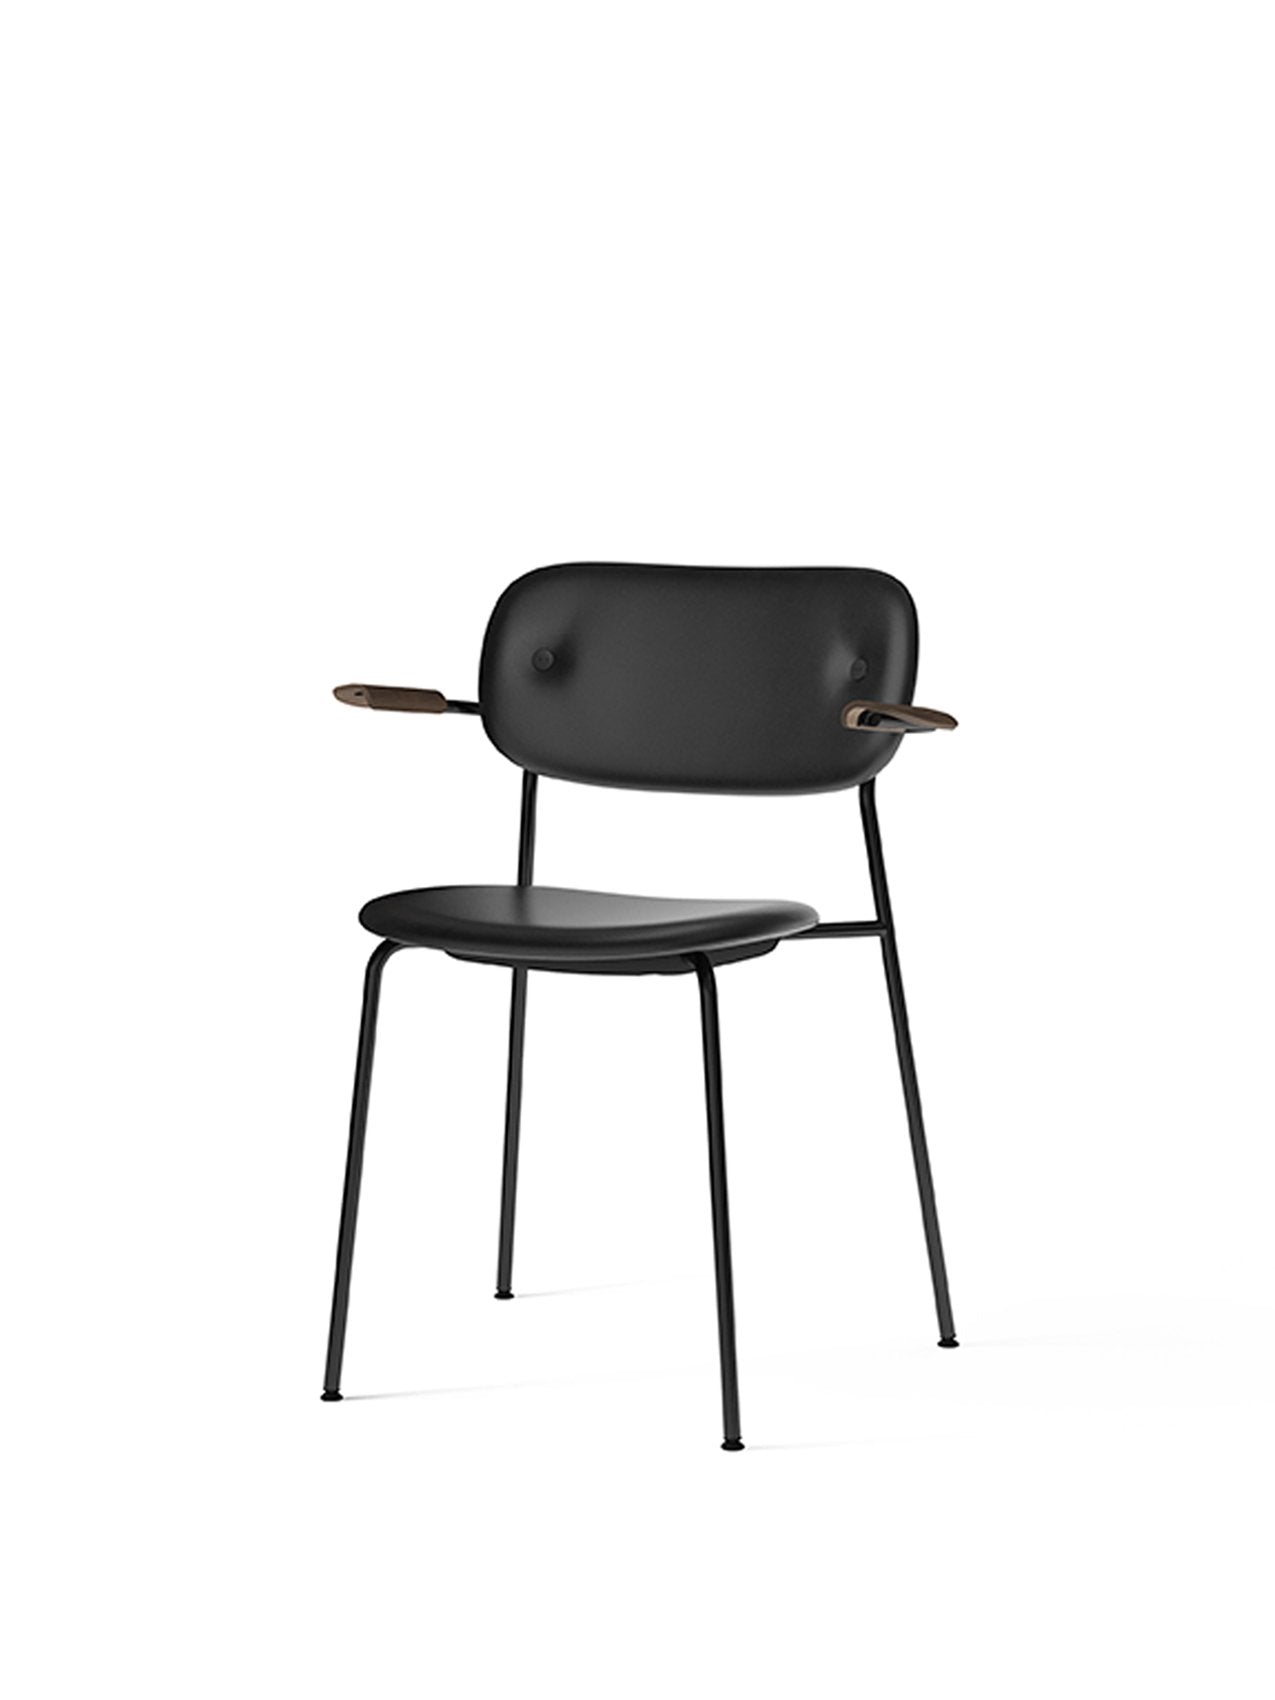 Co Chair, Fully Upholstered-Chair-Norm Architects-Dining Height (Seat 17.7in H)/Chrome without Armrest-0842 Black/Dakar-menu-minimalist-modern-danish-design-home-decor